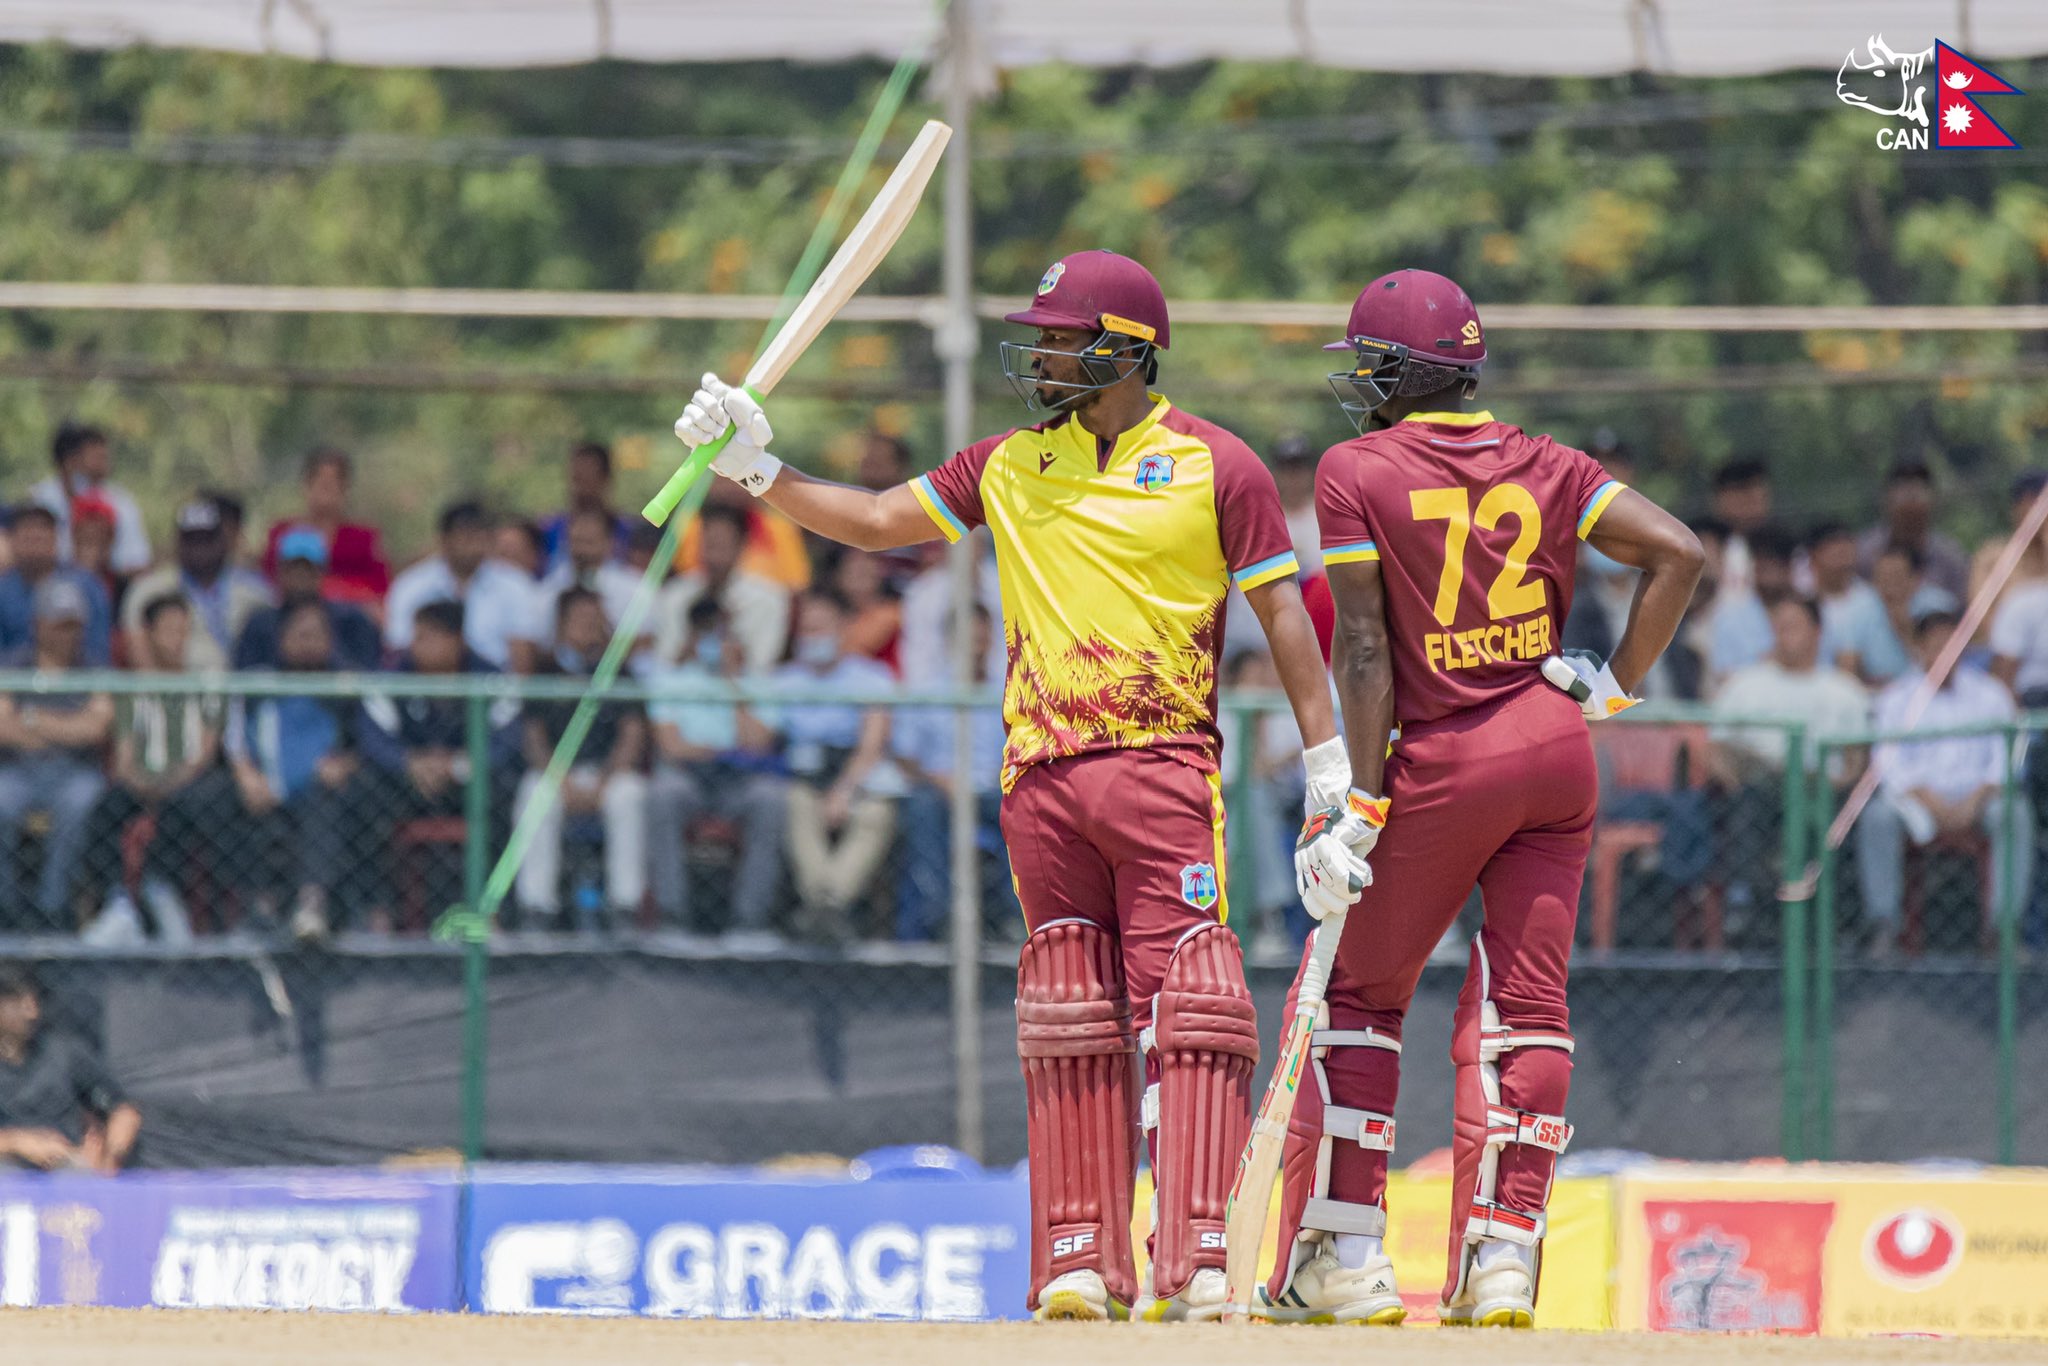 West Indies ‘A’ clinches T20 Series against Nepal with commanding victory (with photos)